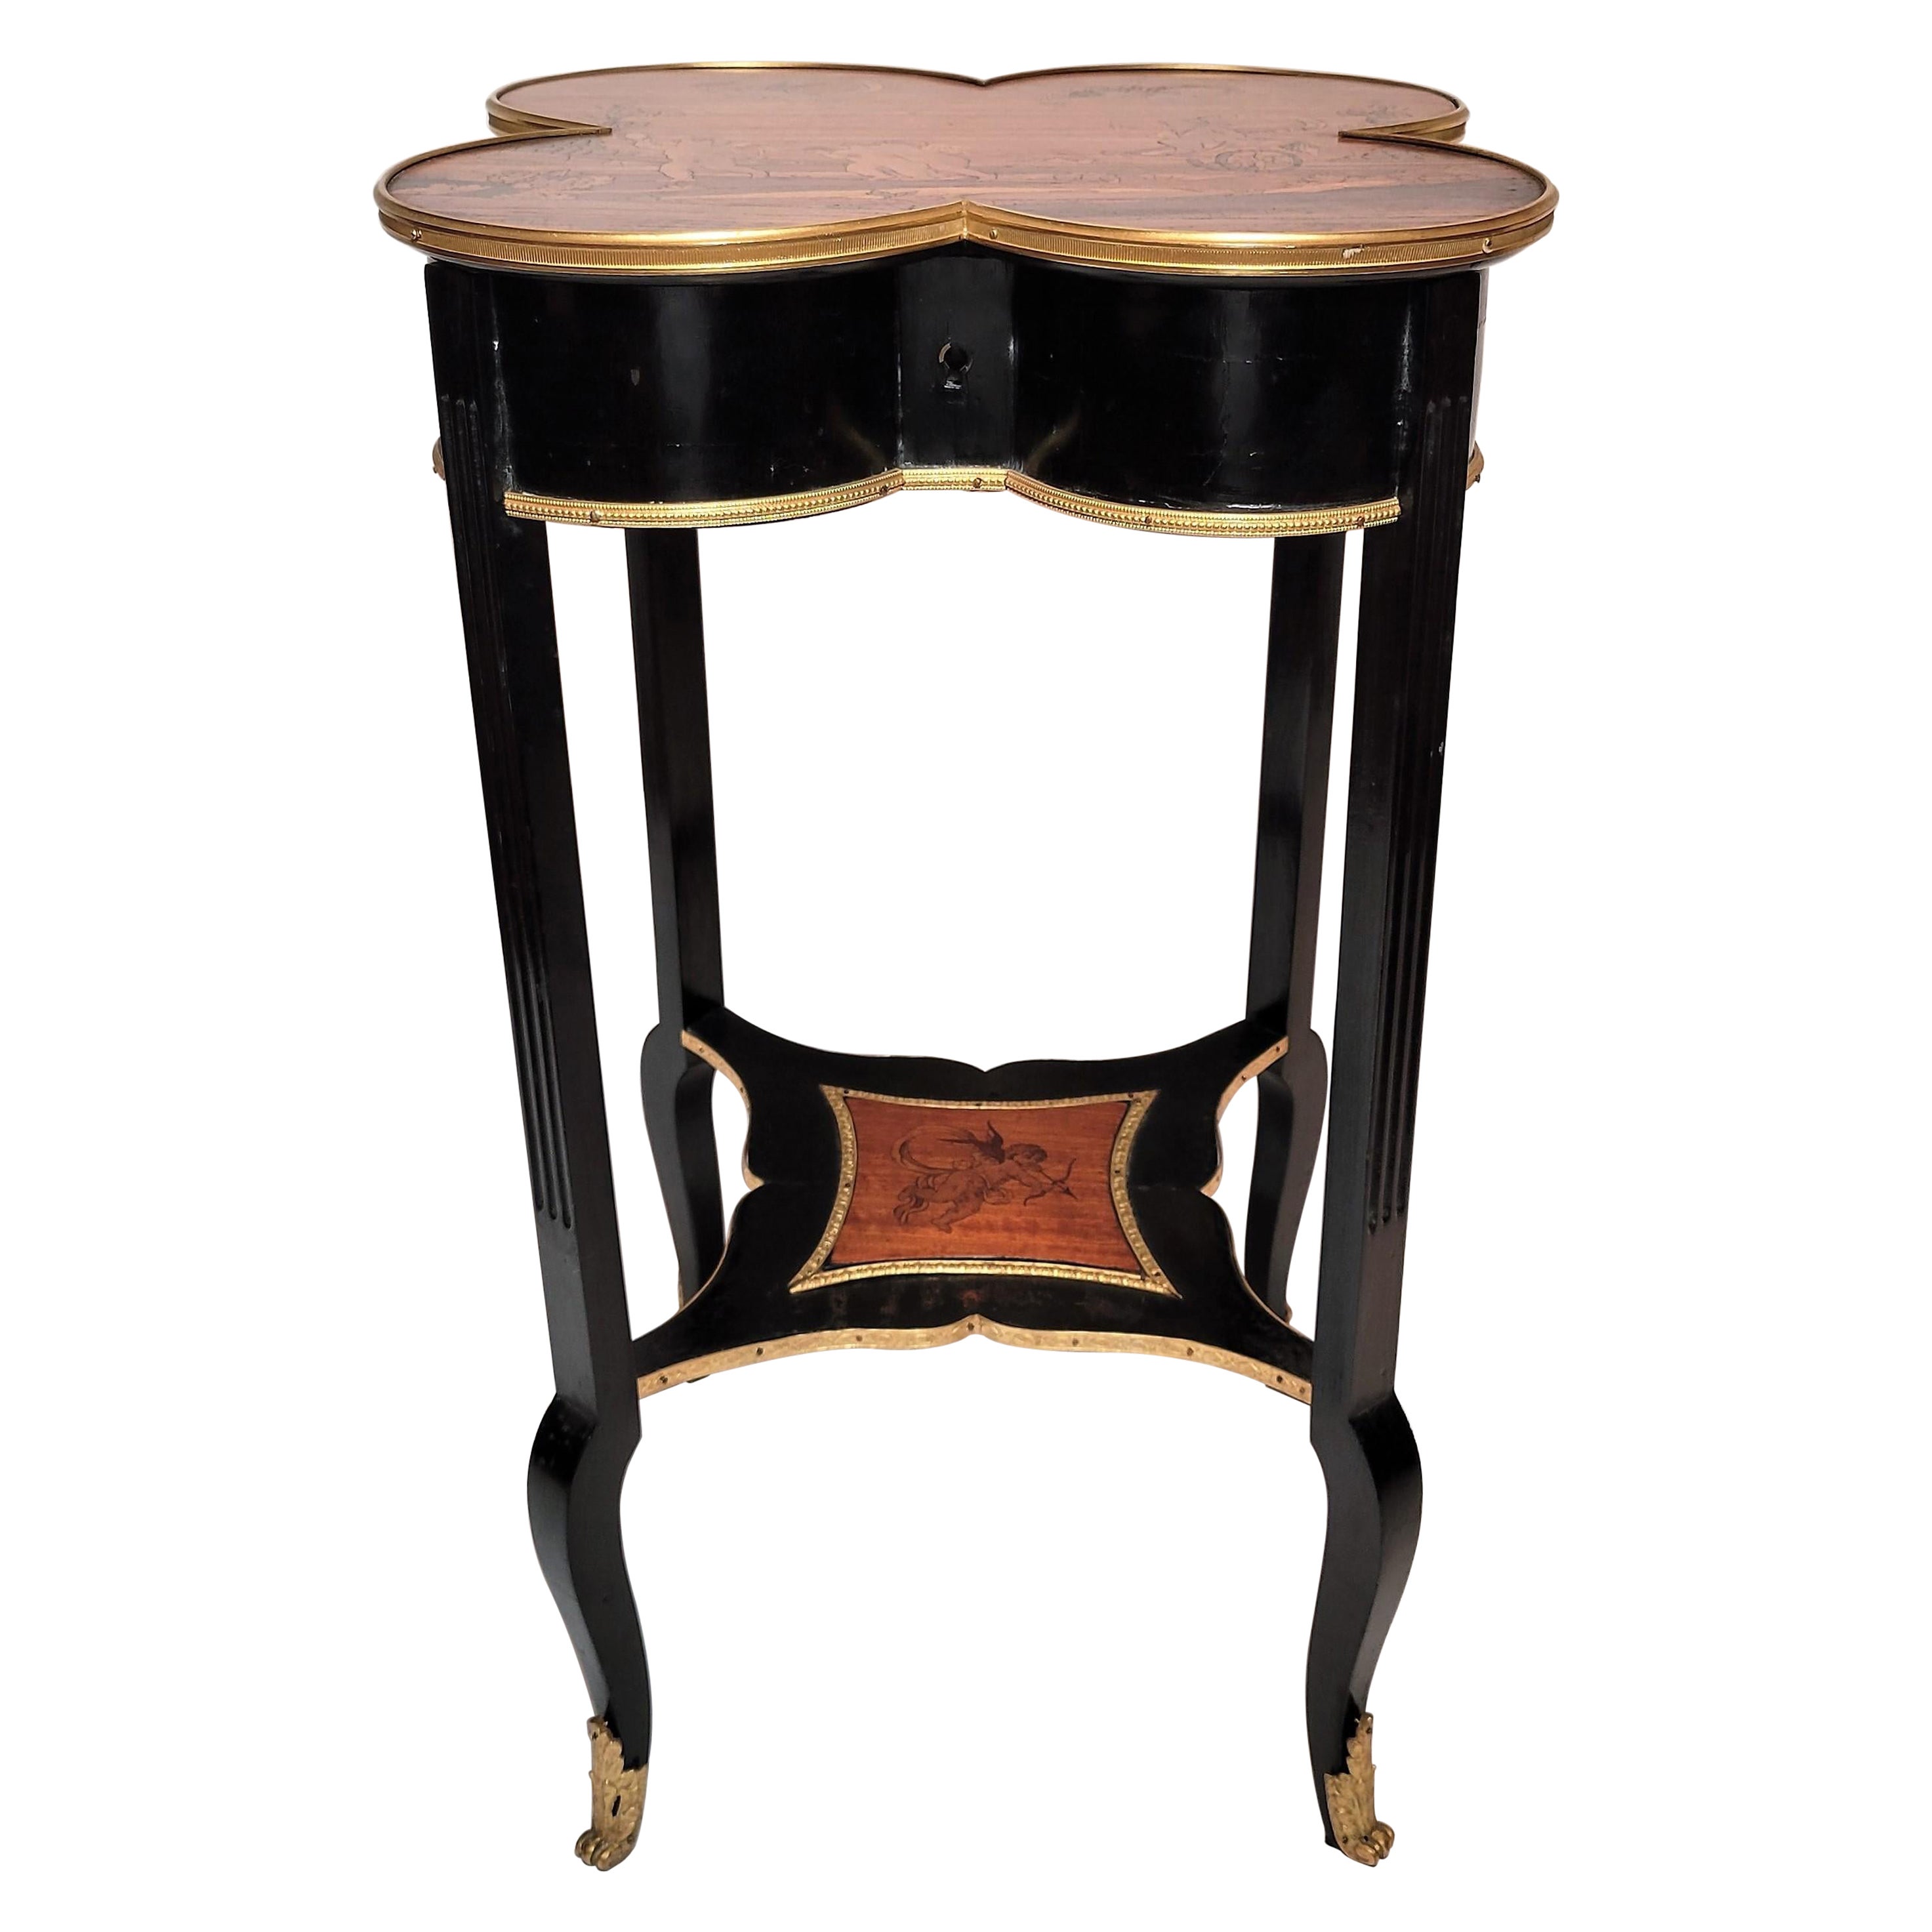 Antique French Clover Shaped Jewelry Table with Inlaid Woods For Sale